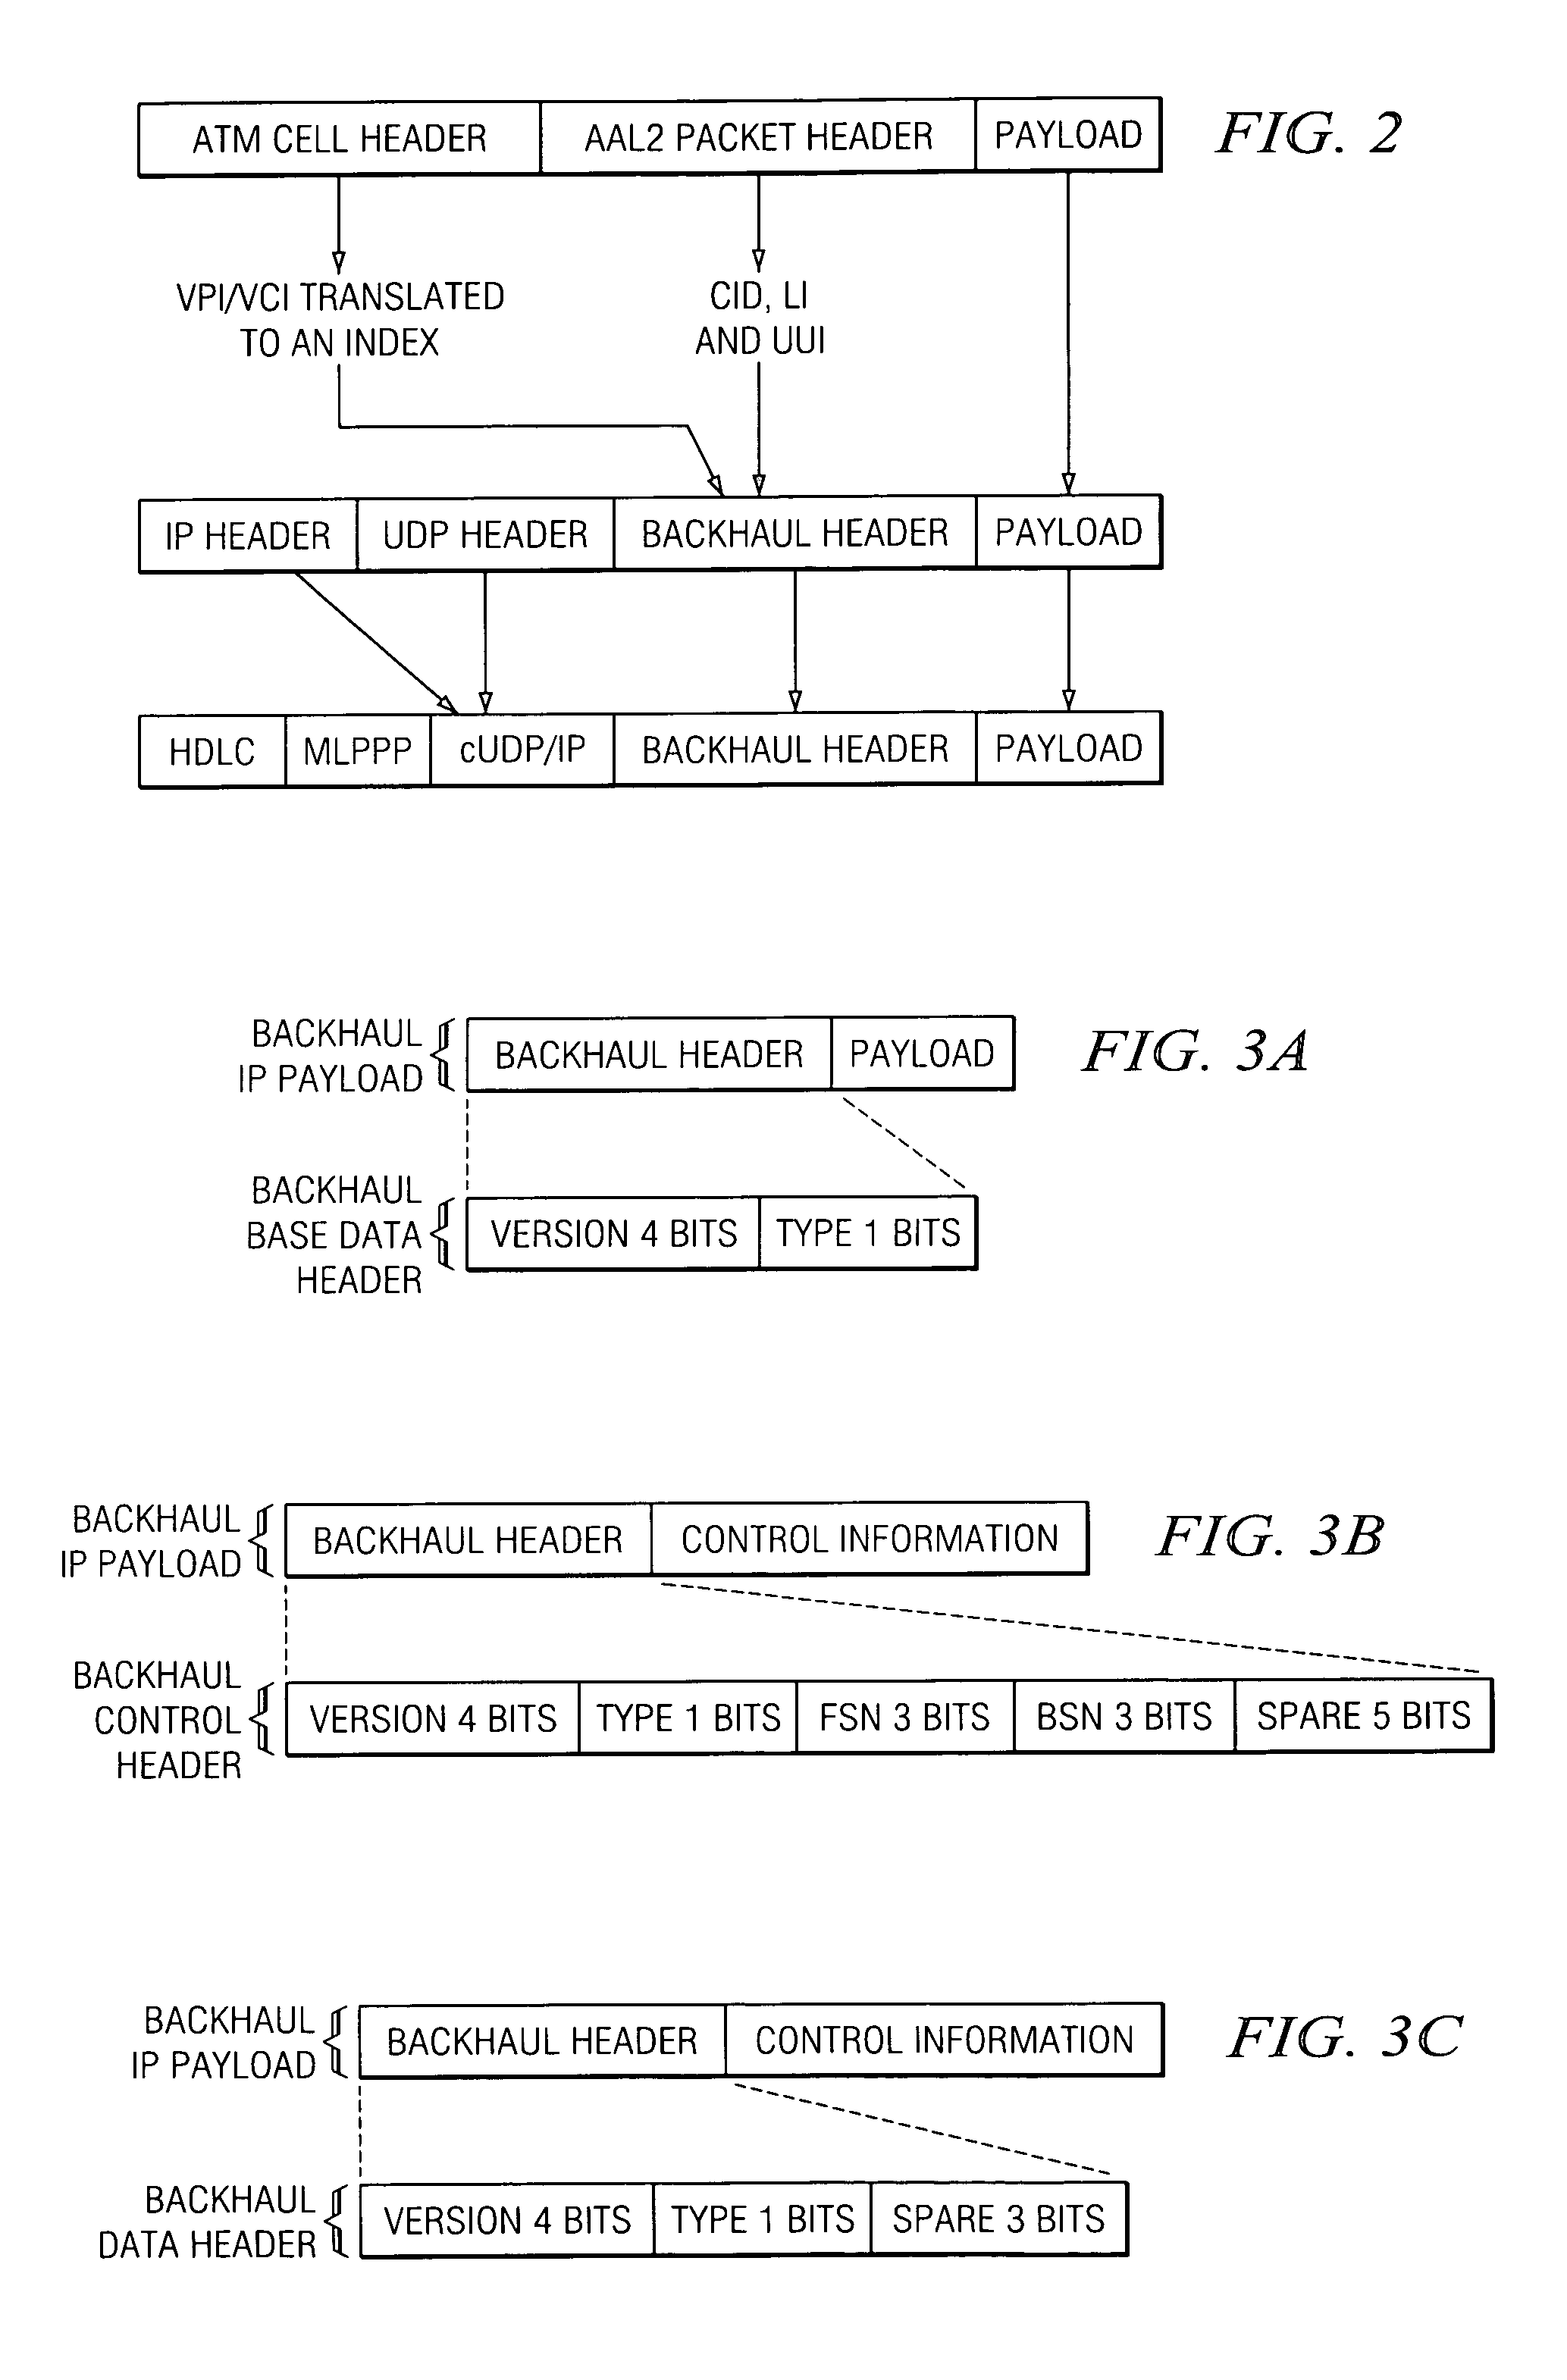 System and method for implementing suppression for asynchronous transfer mode (ATM) adaptation layer 2 (AAL2) traffic in a communications environment